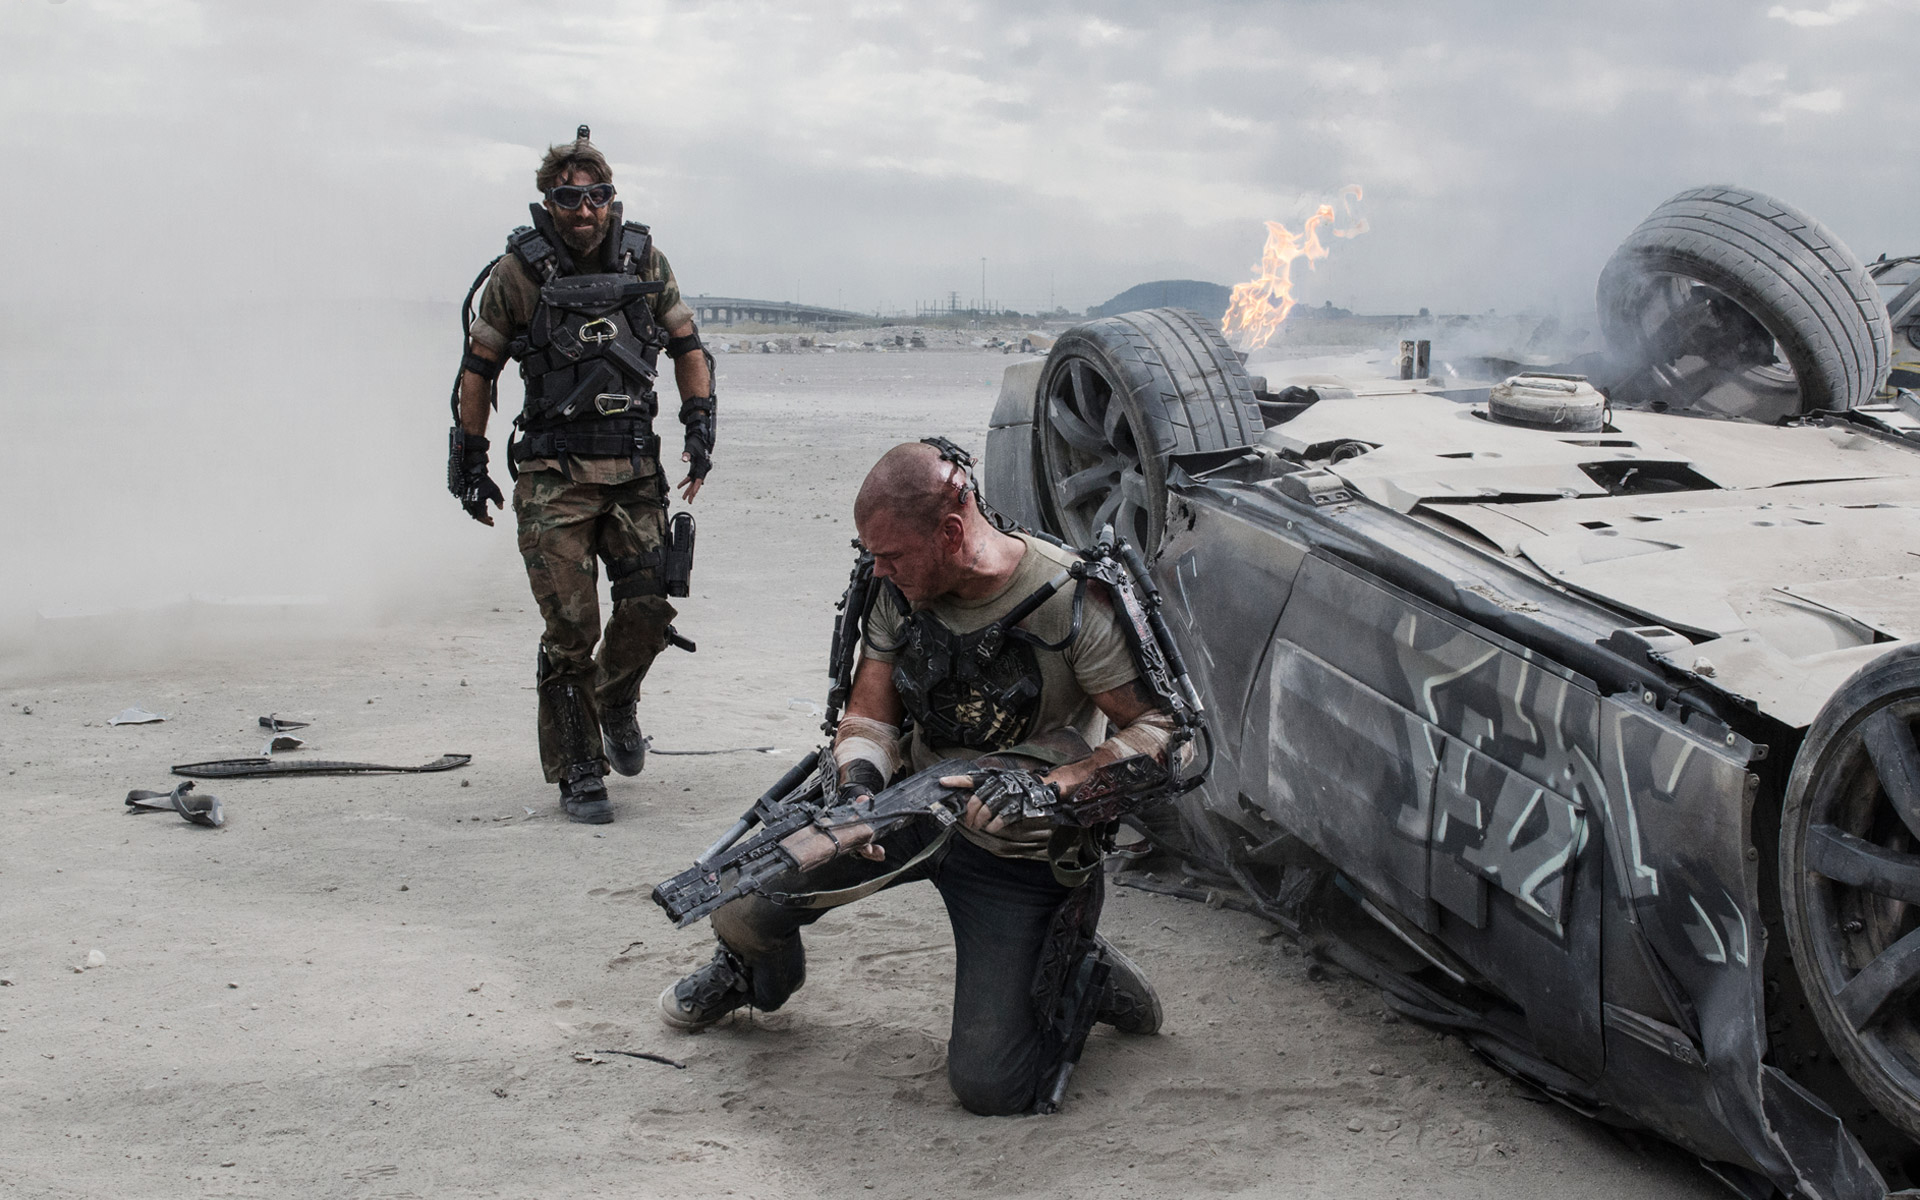 Elysium Hollywood Action Movie Wallpaper HD Widescreen